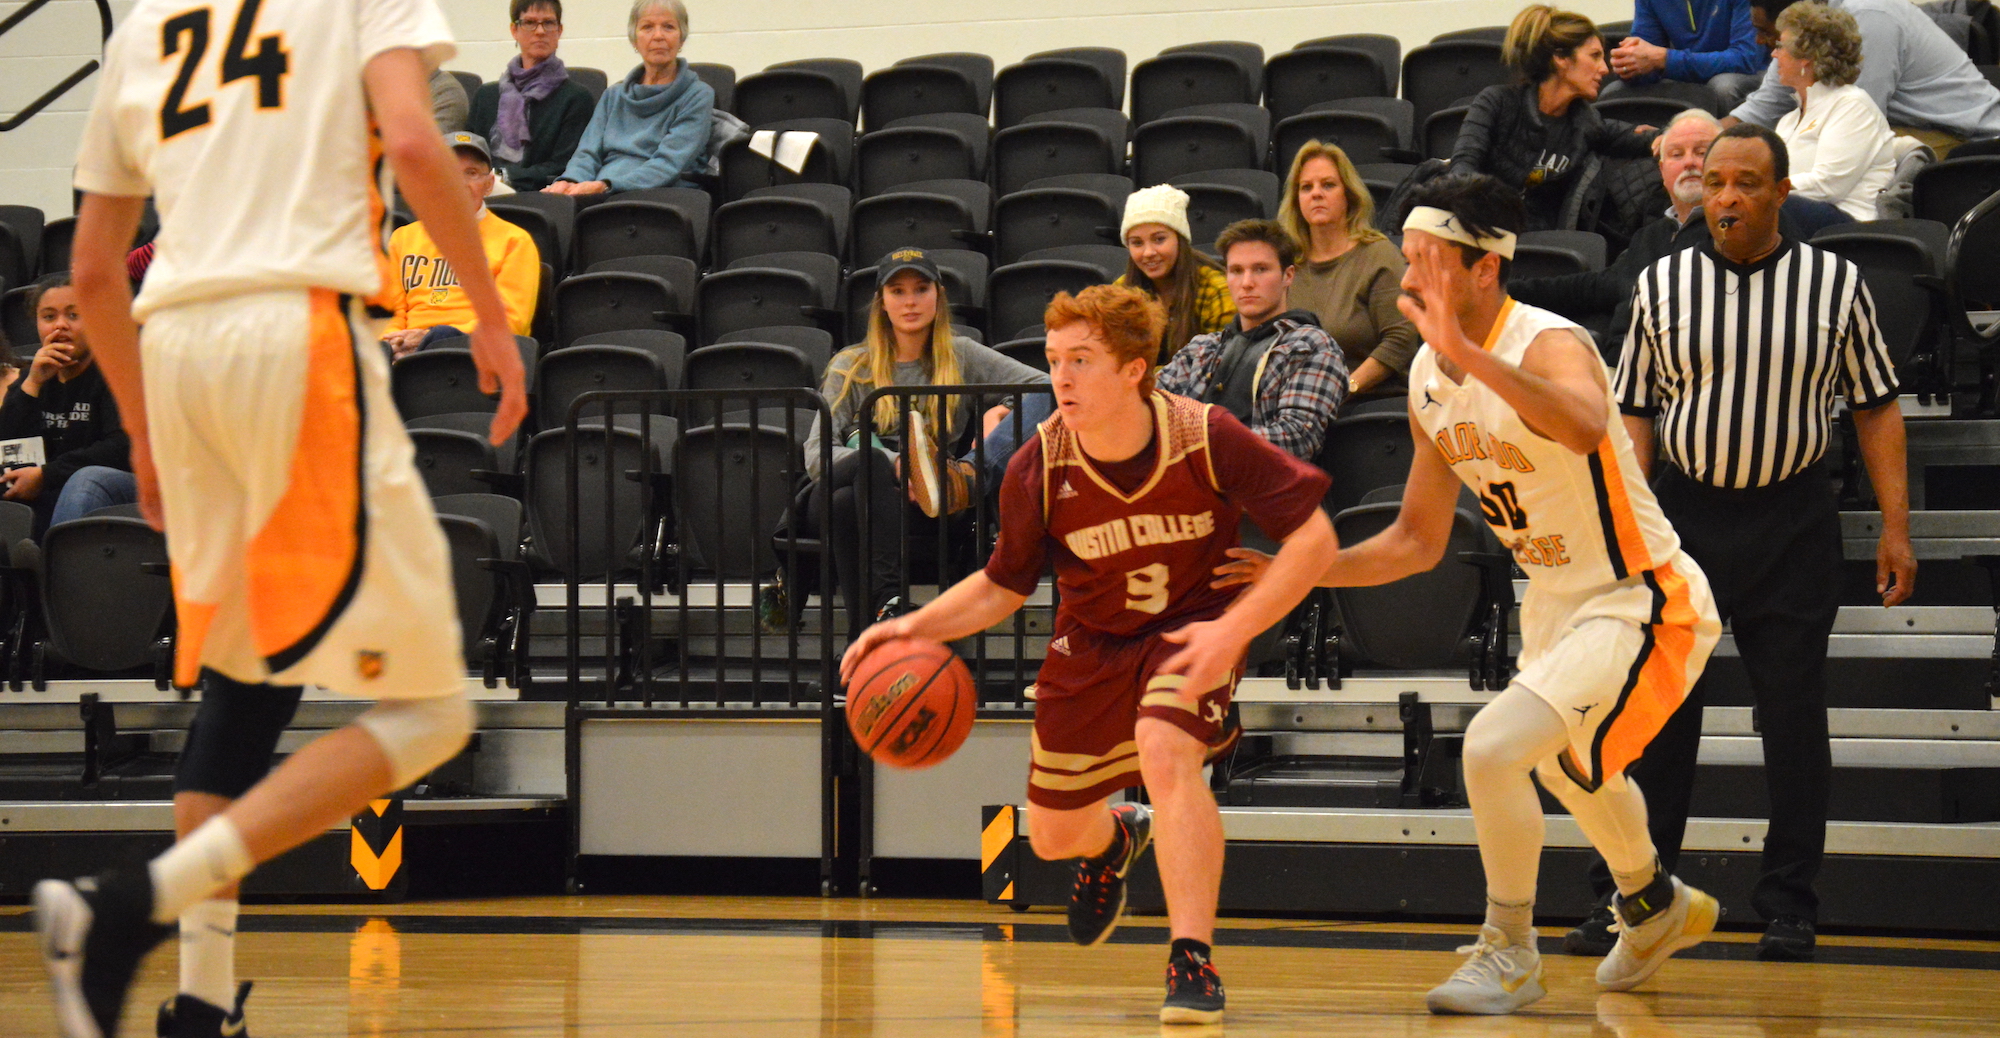 'Roos Fall to Schreiner in Overtime